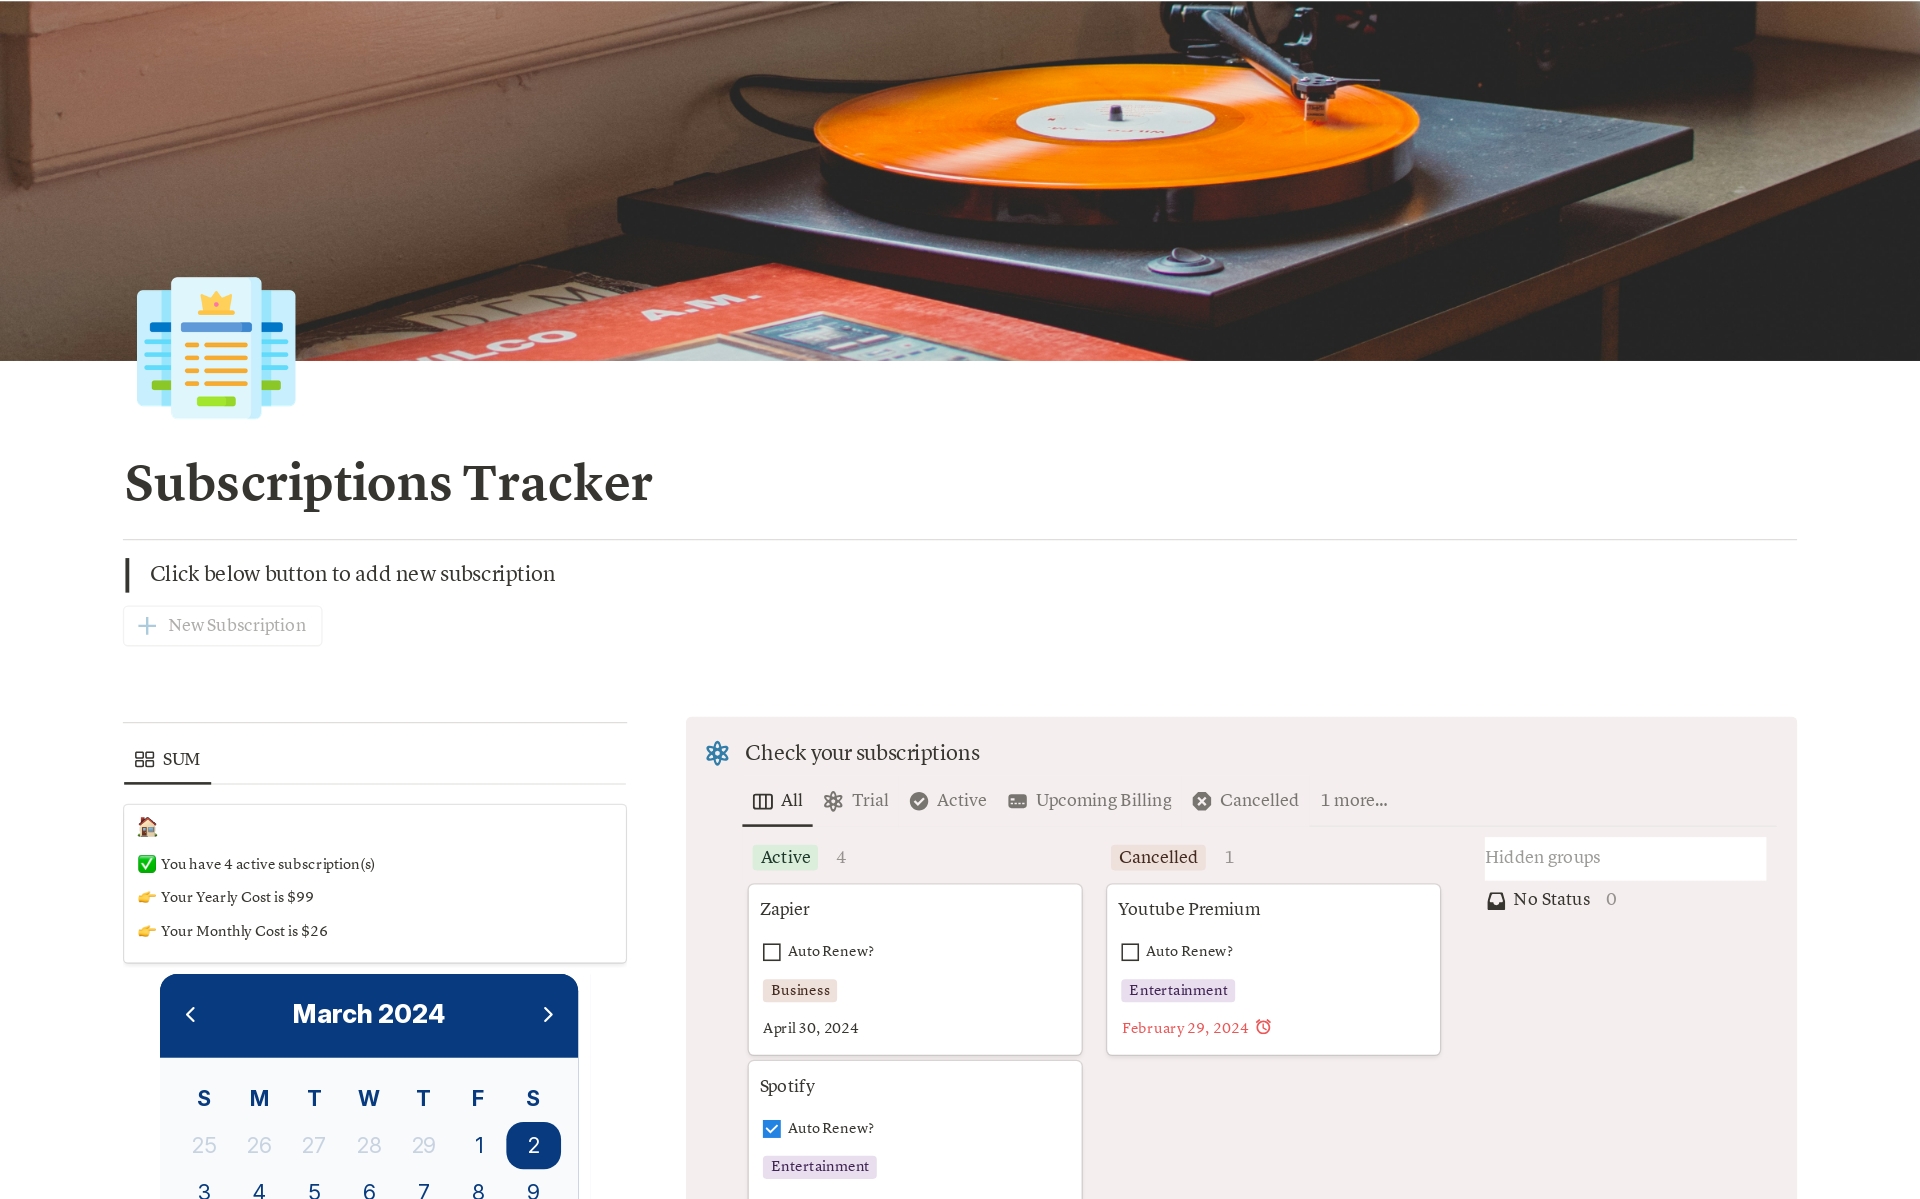 This easy-to-use template helps you track all of your subscriptions in one place, so you can easily see where your money is going. You can also set up reminders for upcoming payments, so you never miss a bill again.